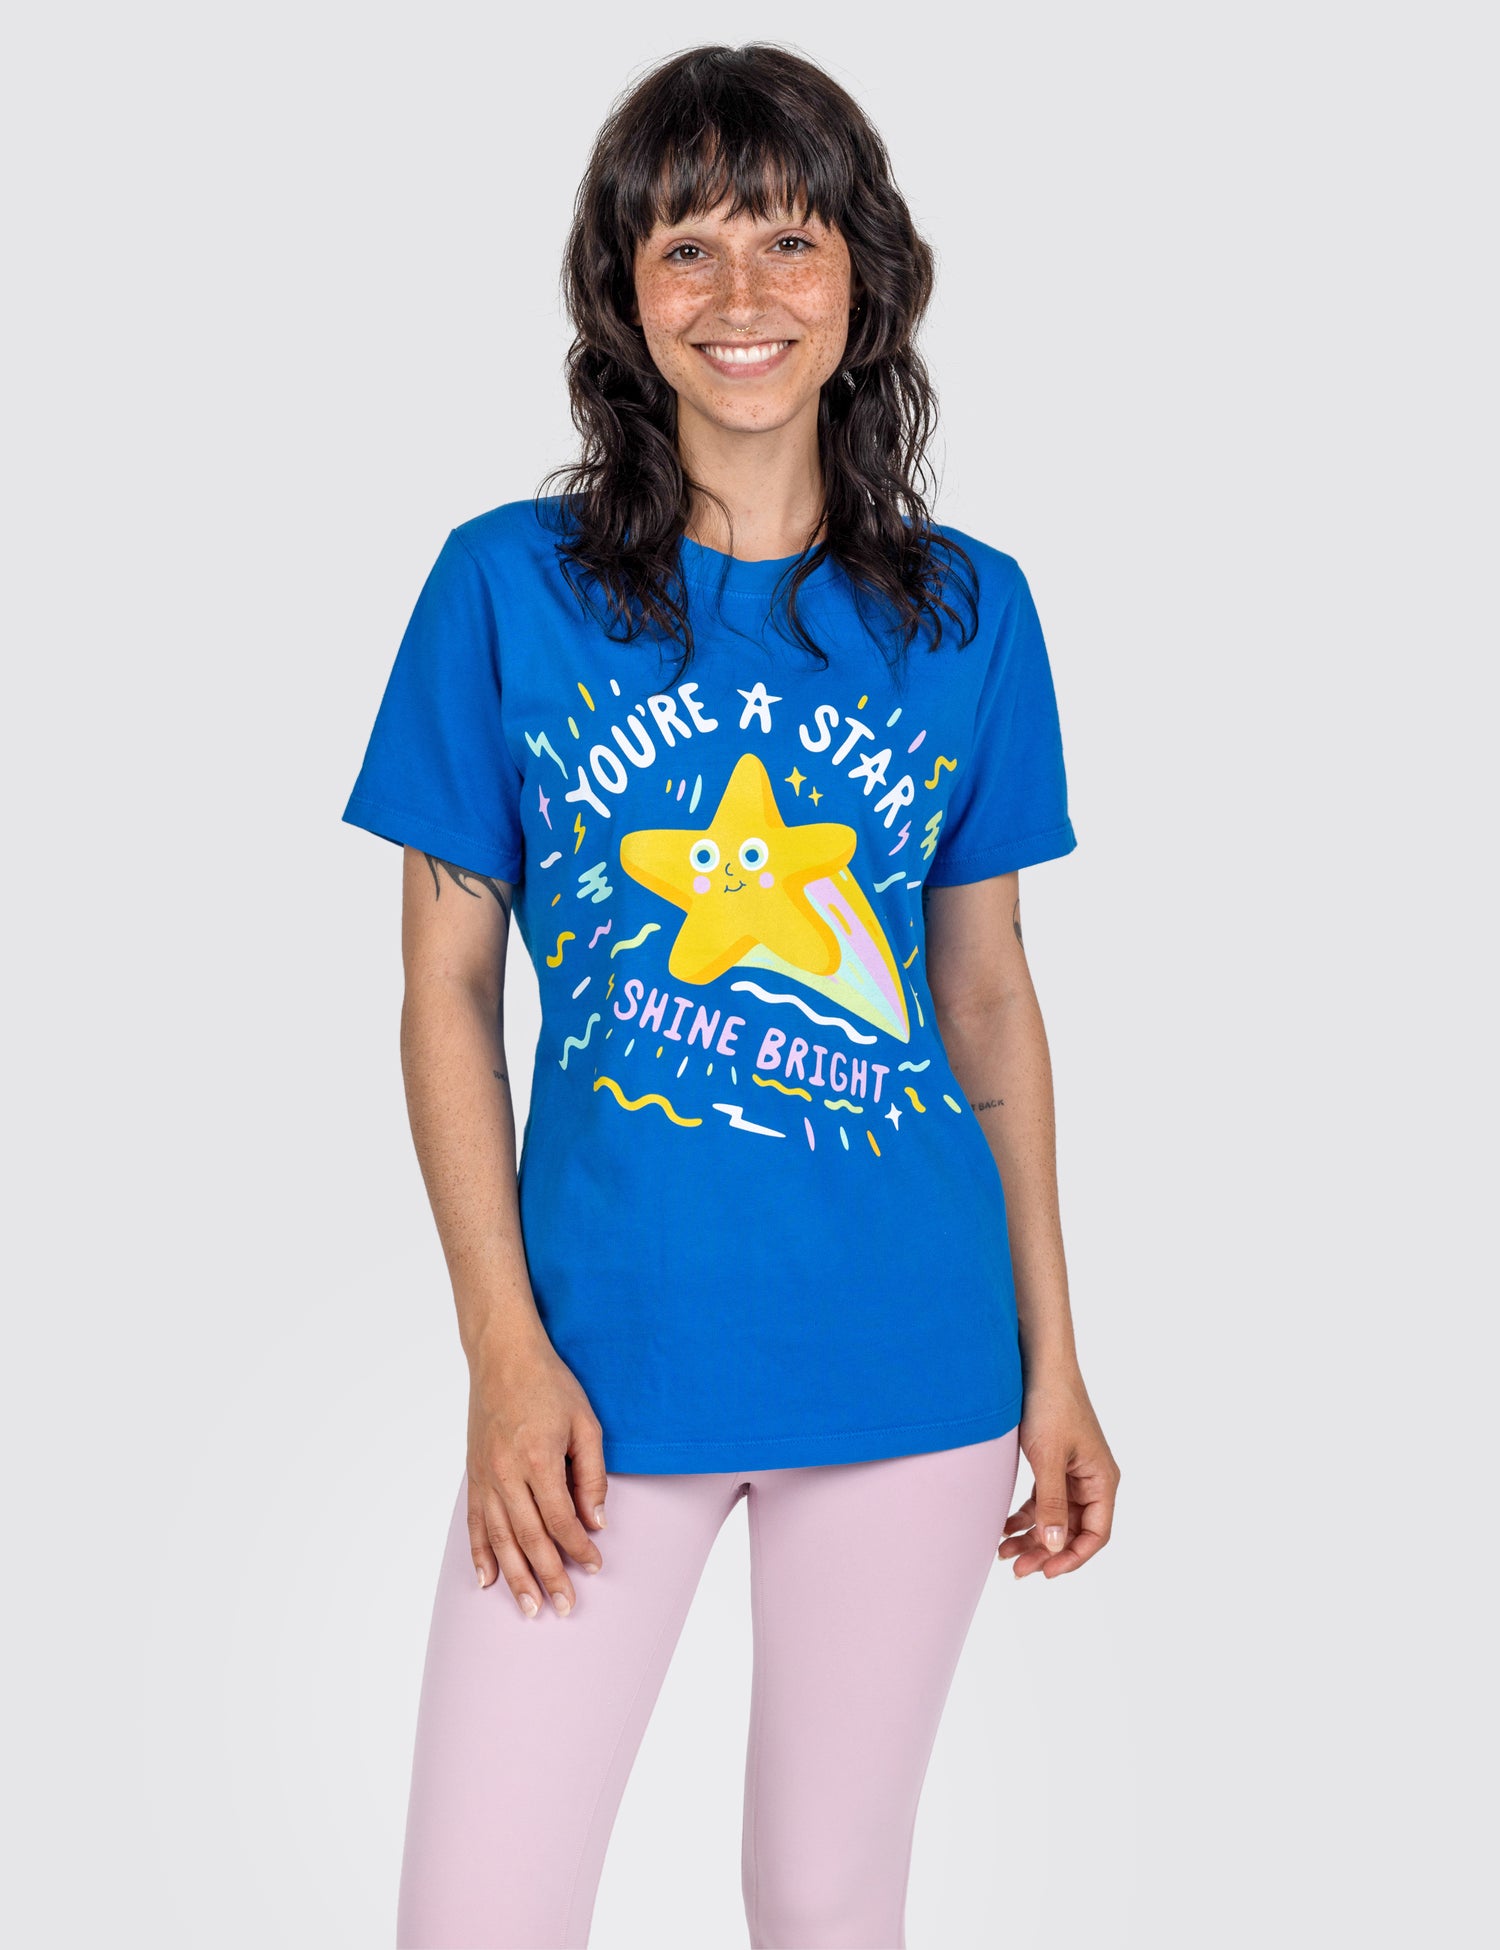 Woman wearing a blue T-shirt with screen print design on it saying the words you're a star shine bright